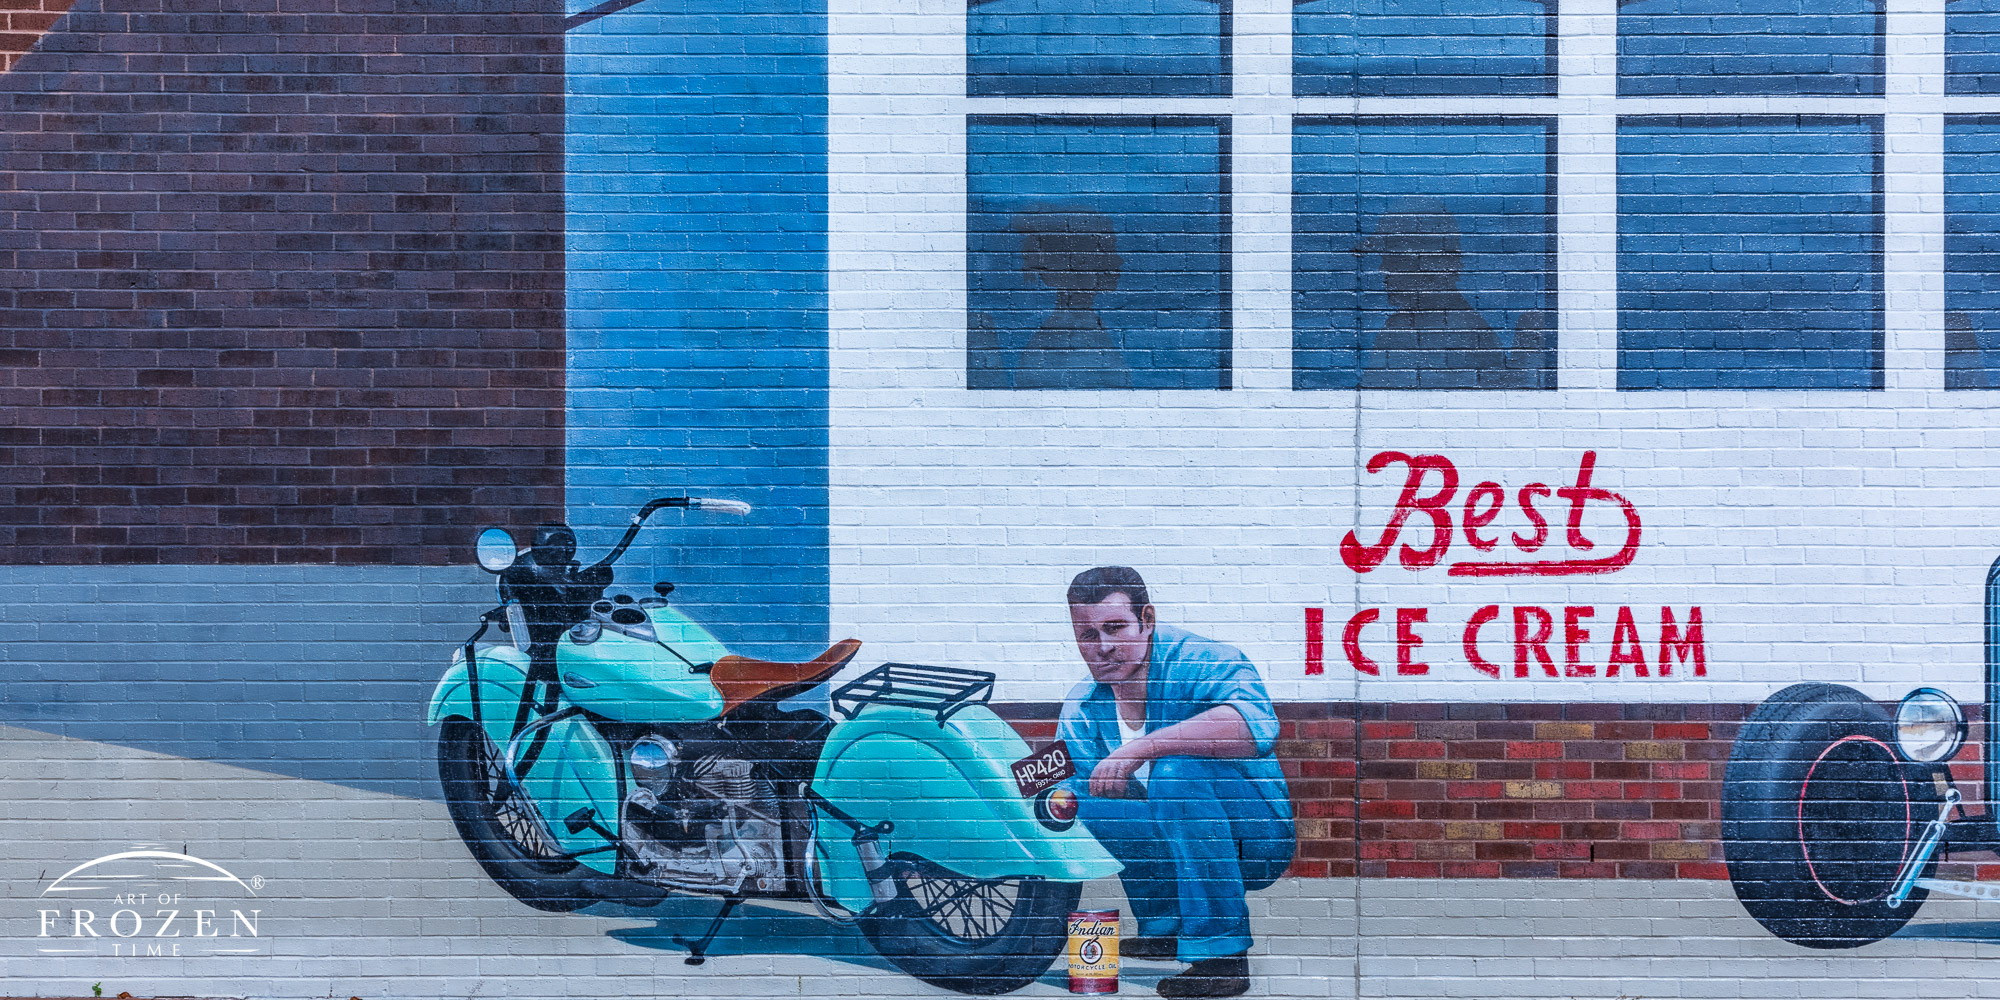 A mural depicting a 1950s diner showing a man tinkering with his classic motorcycle